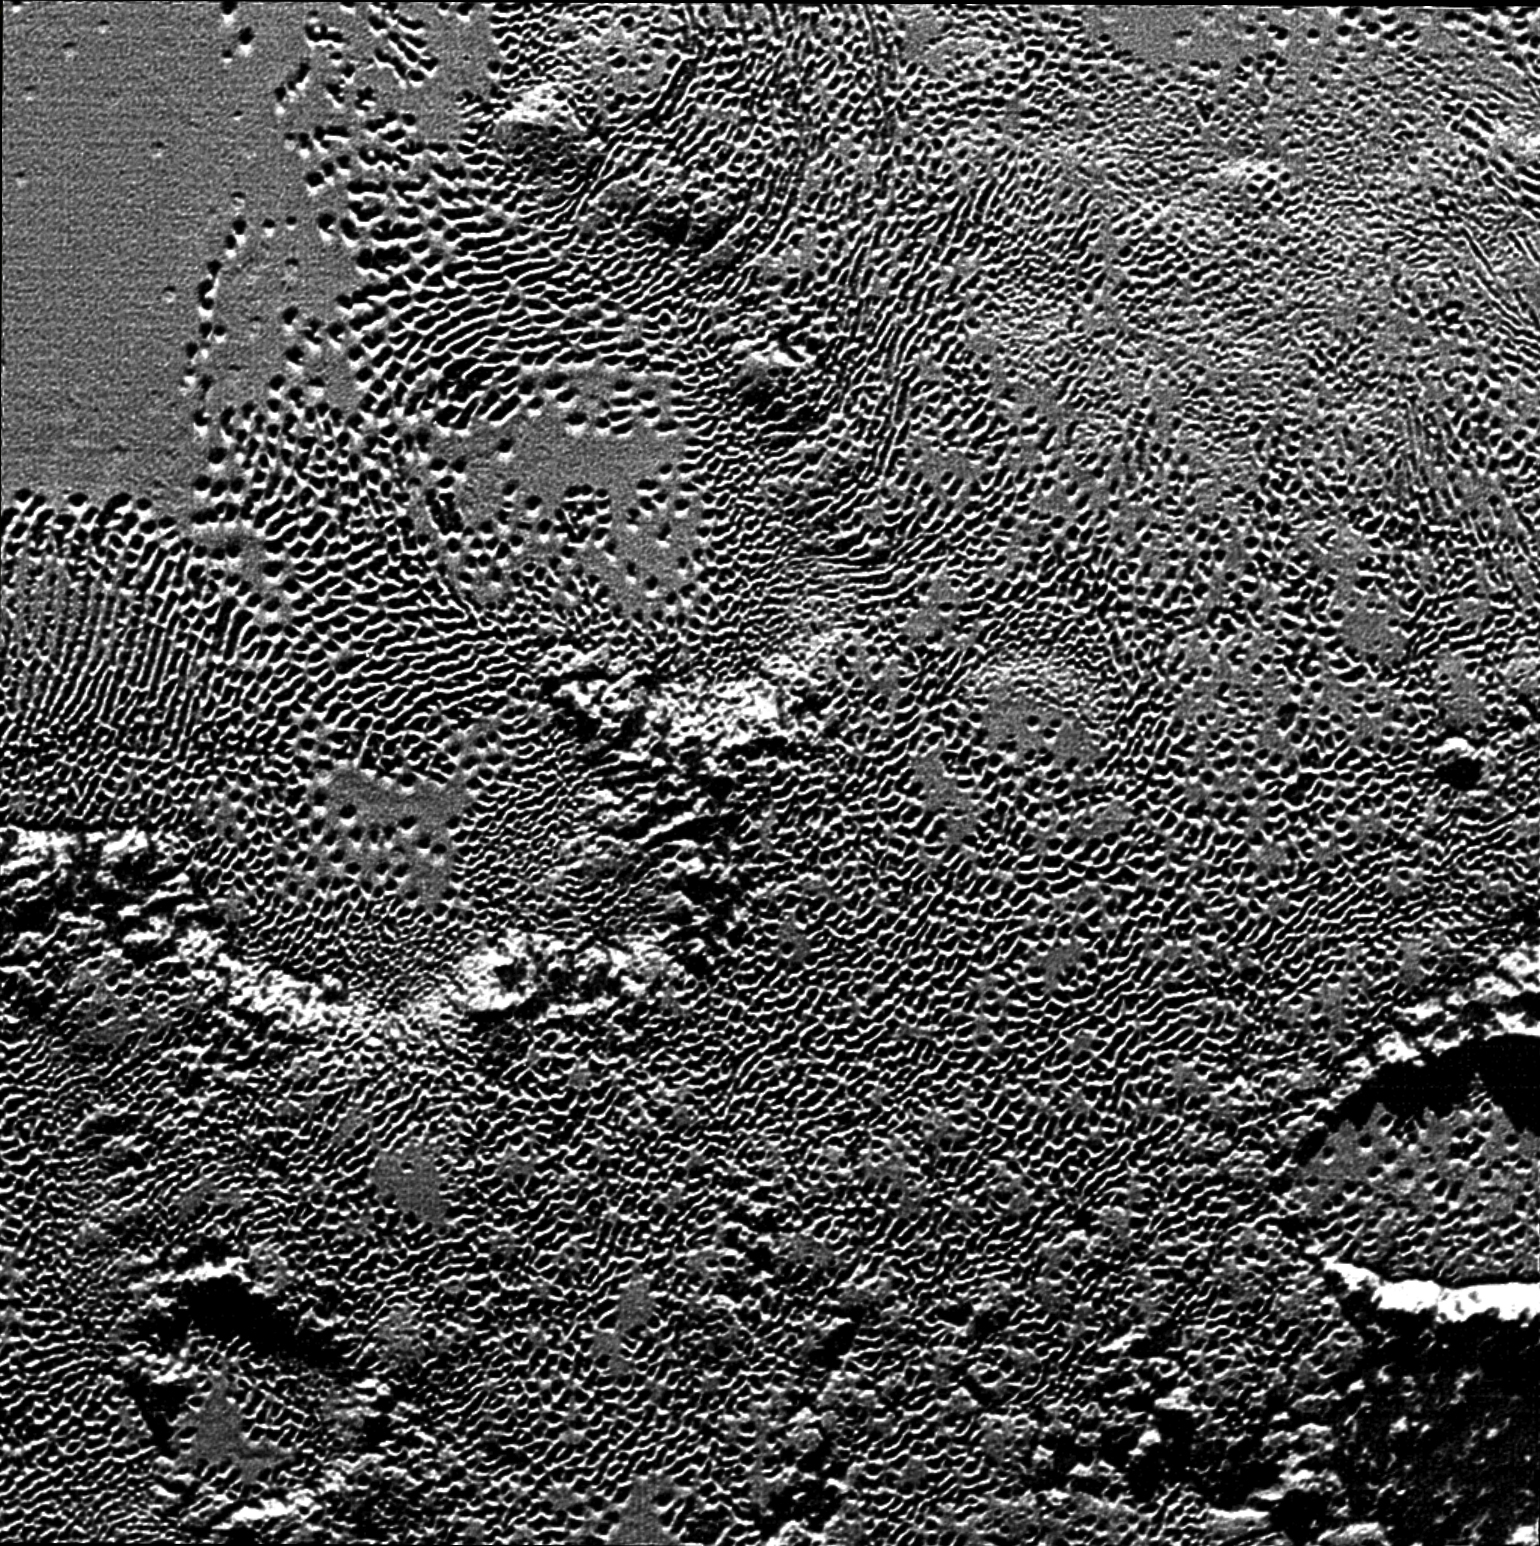 On July 14 the telescopic camera on NASA's New Horizons spacecraft took the highest resolution images ever obtained of the intricate pattern of "pits" across a section of Pluto's prominent heart-shaped region, informally named Tombaugh Regio.